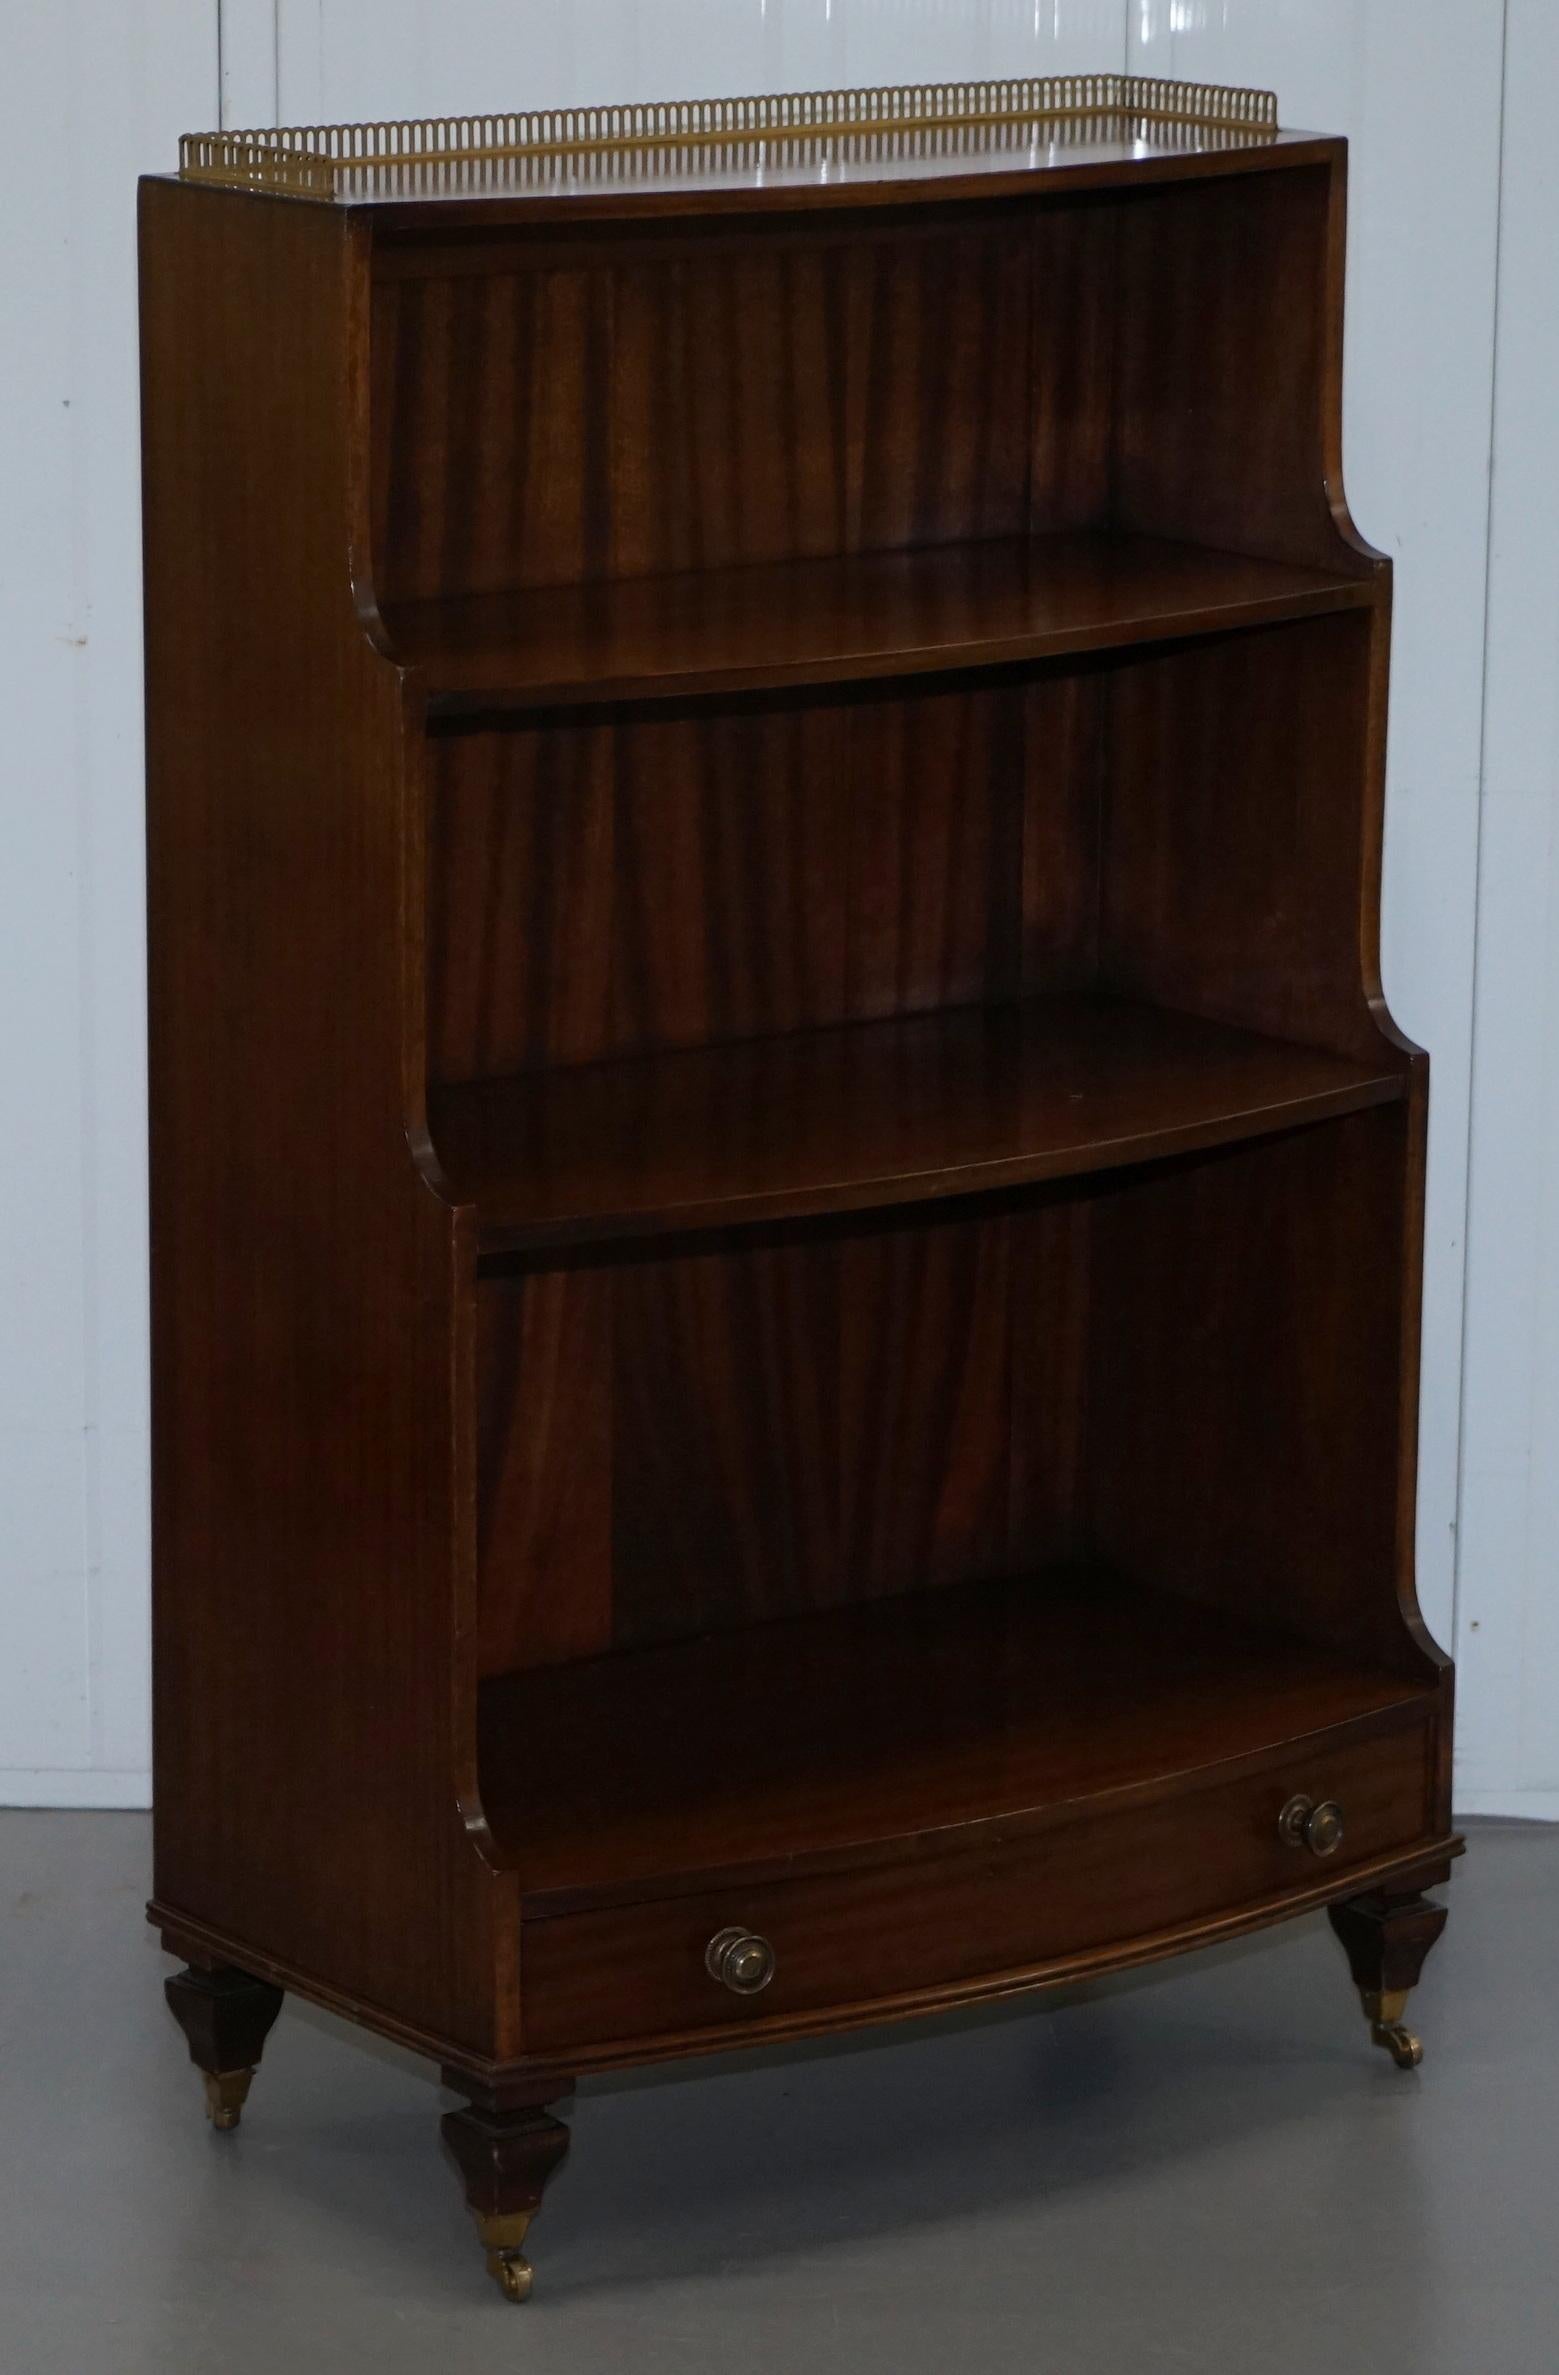 Rare Pair of Dwarf Waterfall Open Bookcases Brass Gallery Rails Castors Drawers For Sale 5